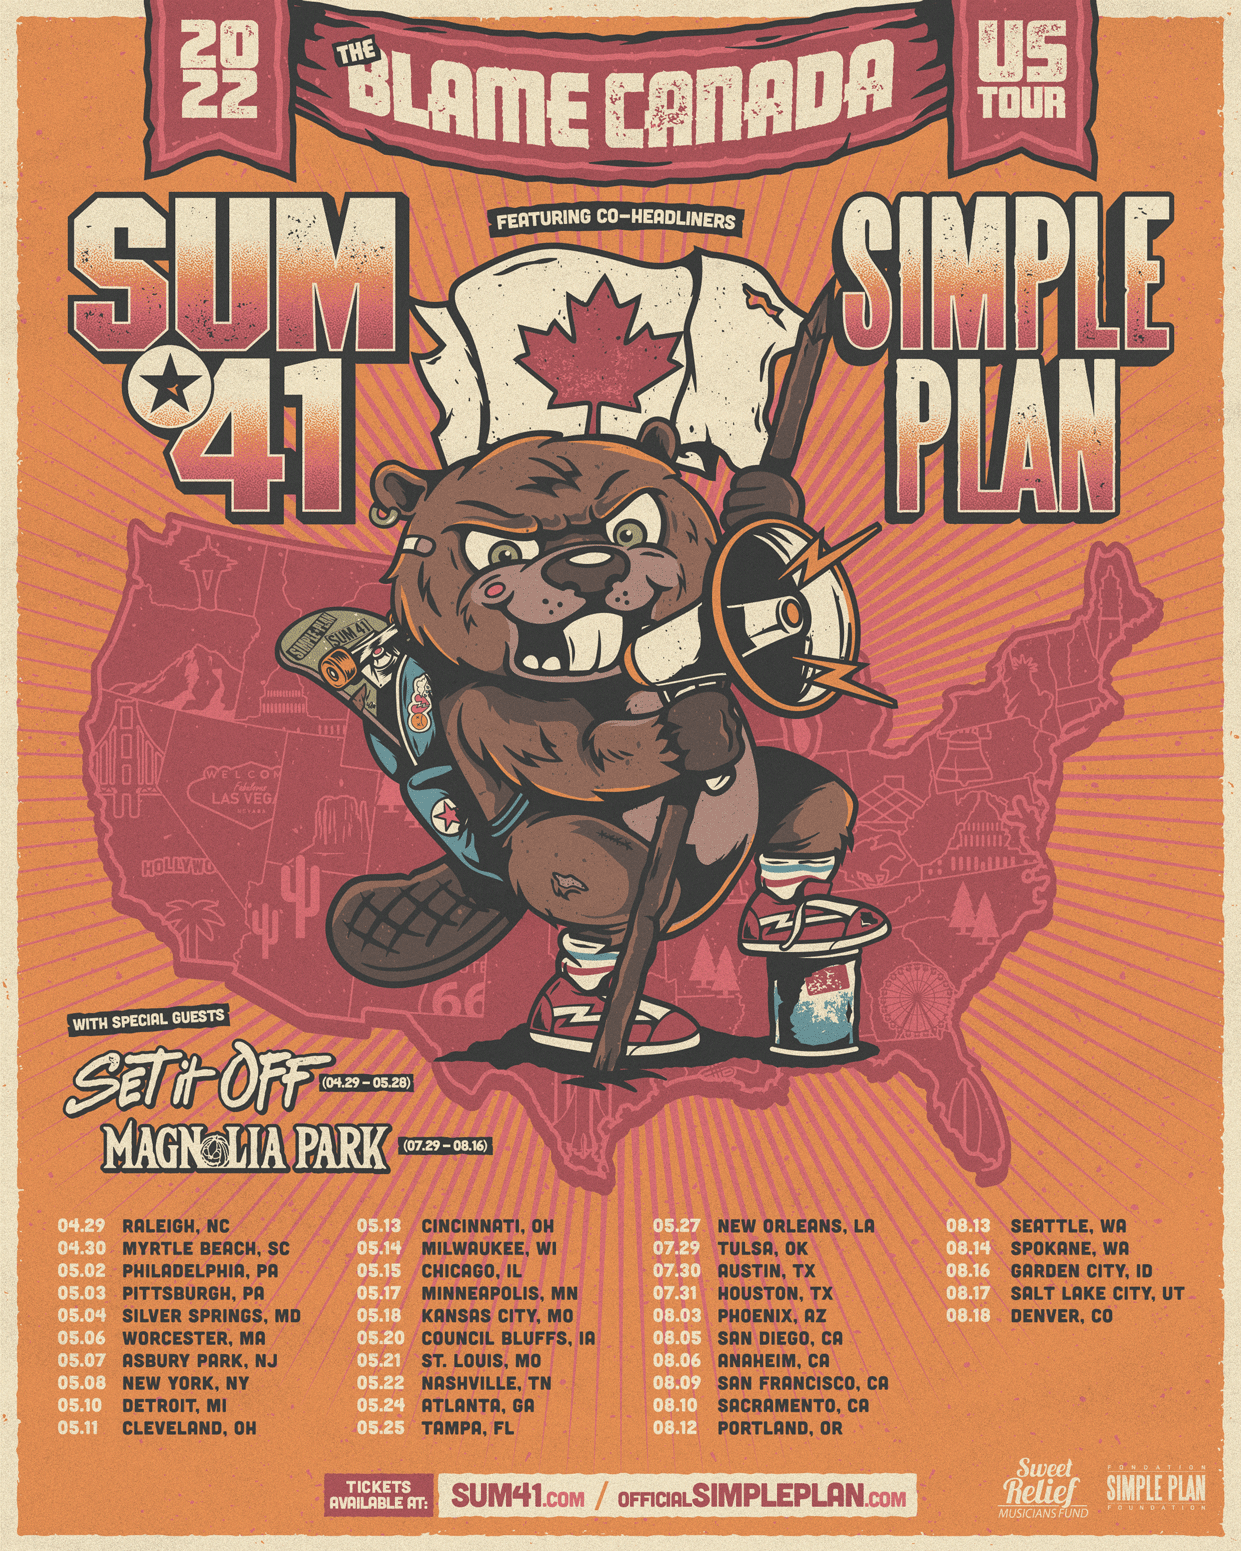 Sum 41 and Simple Plan - Blame Canada Tour